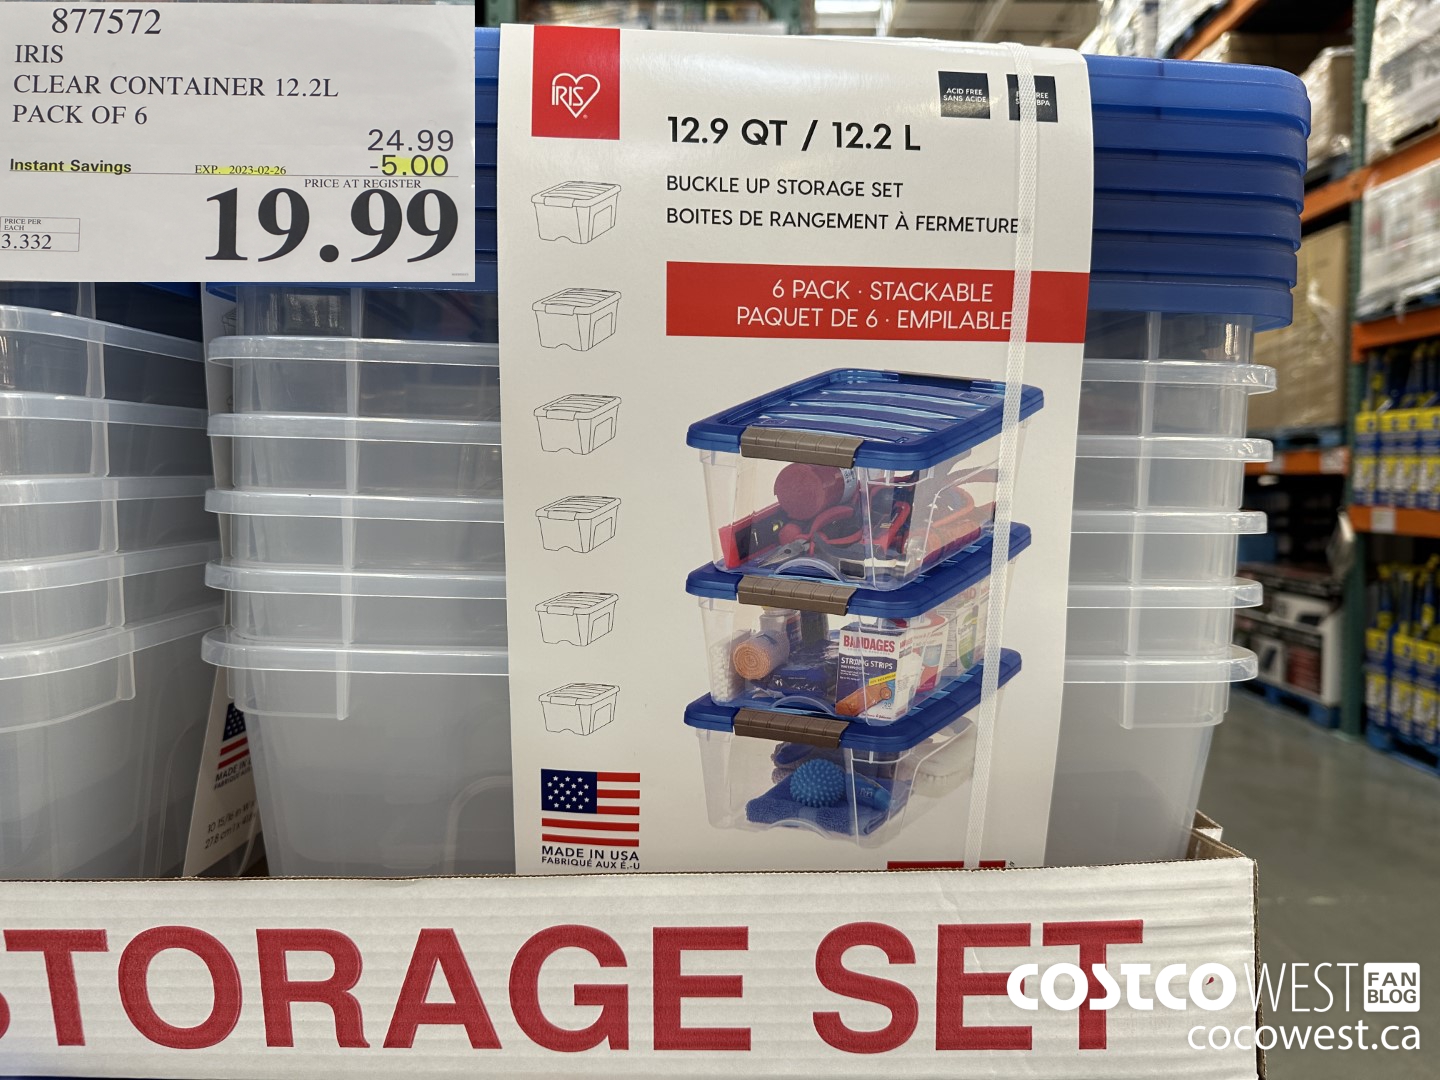 Weekend Update! – Costco Sale Items for Feb 24-26, 2023 for BC, AB, MB, SK  - Costco West Fan Blog